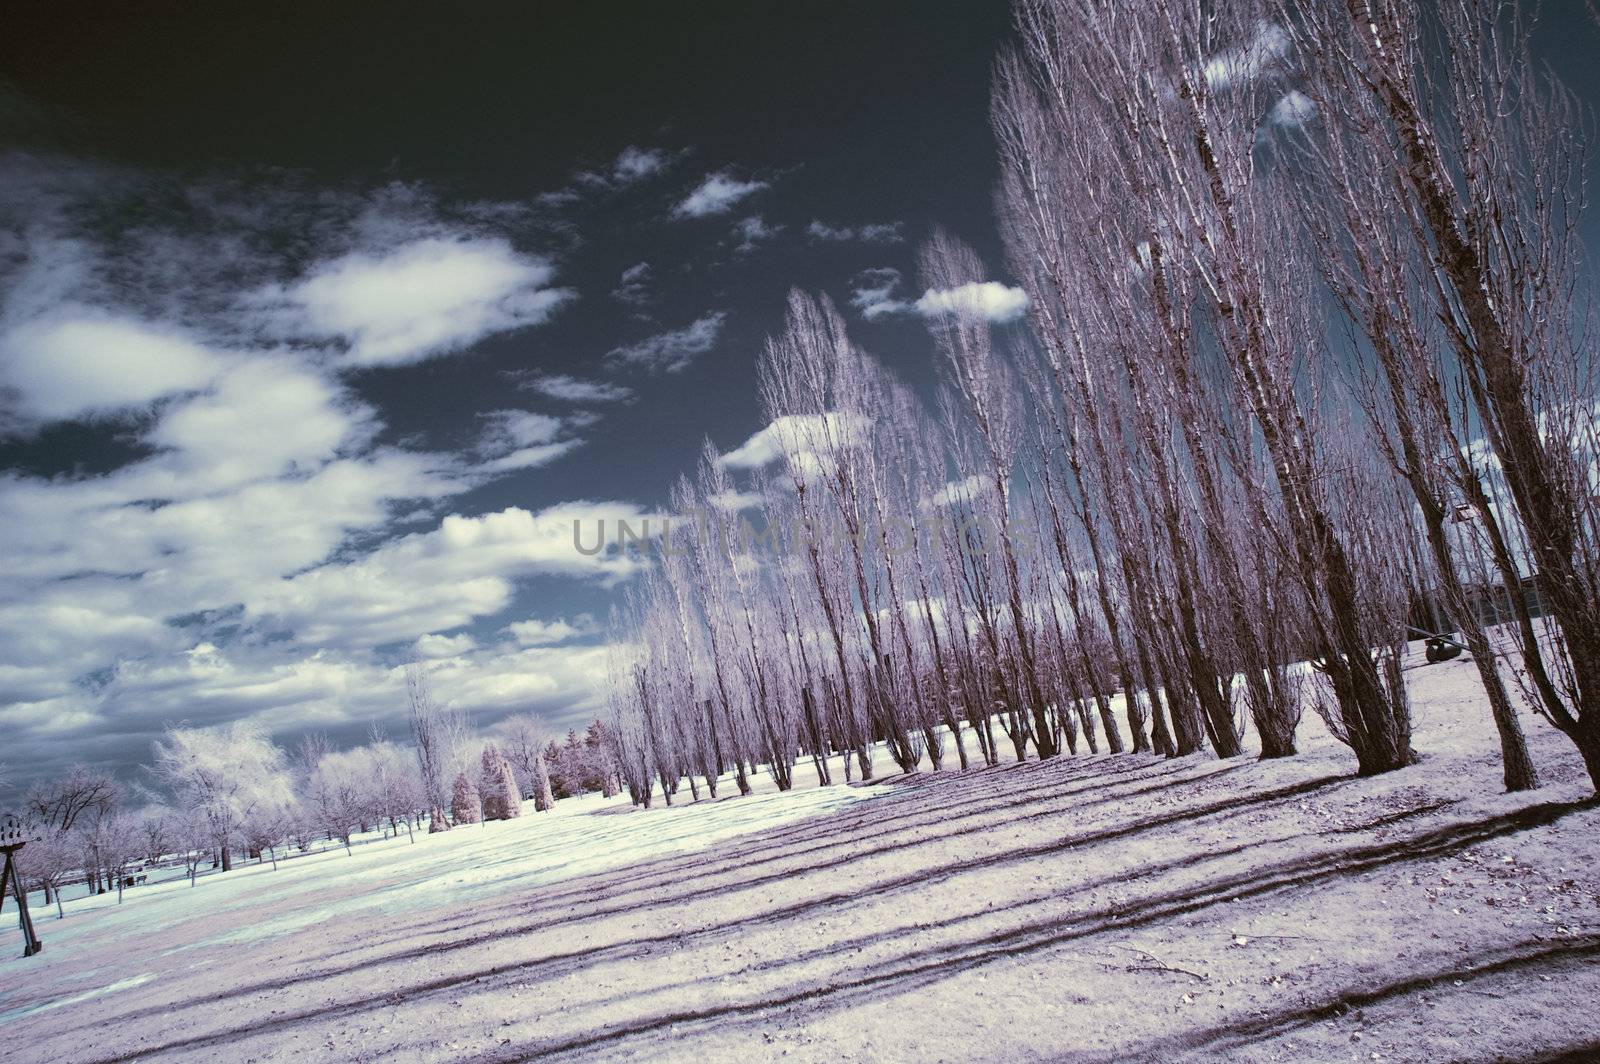 Landscape scene shot with an infrared filter